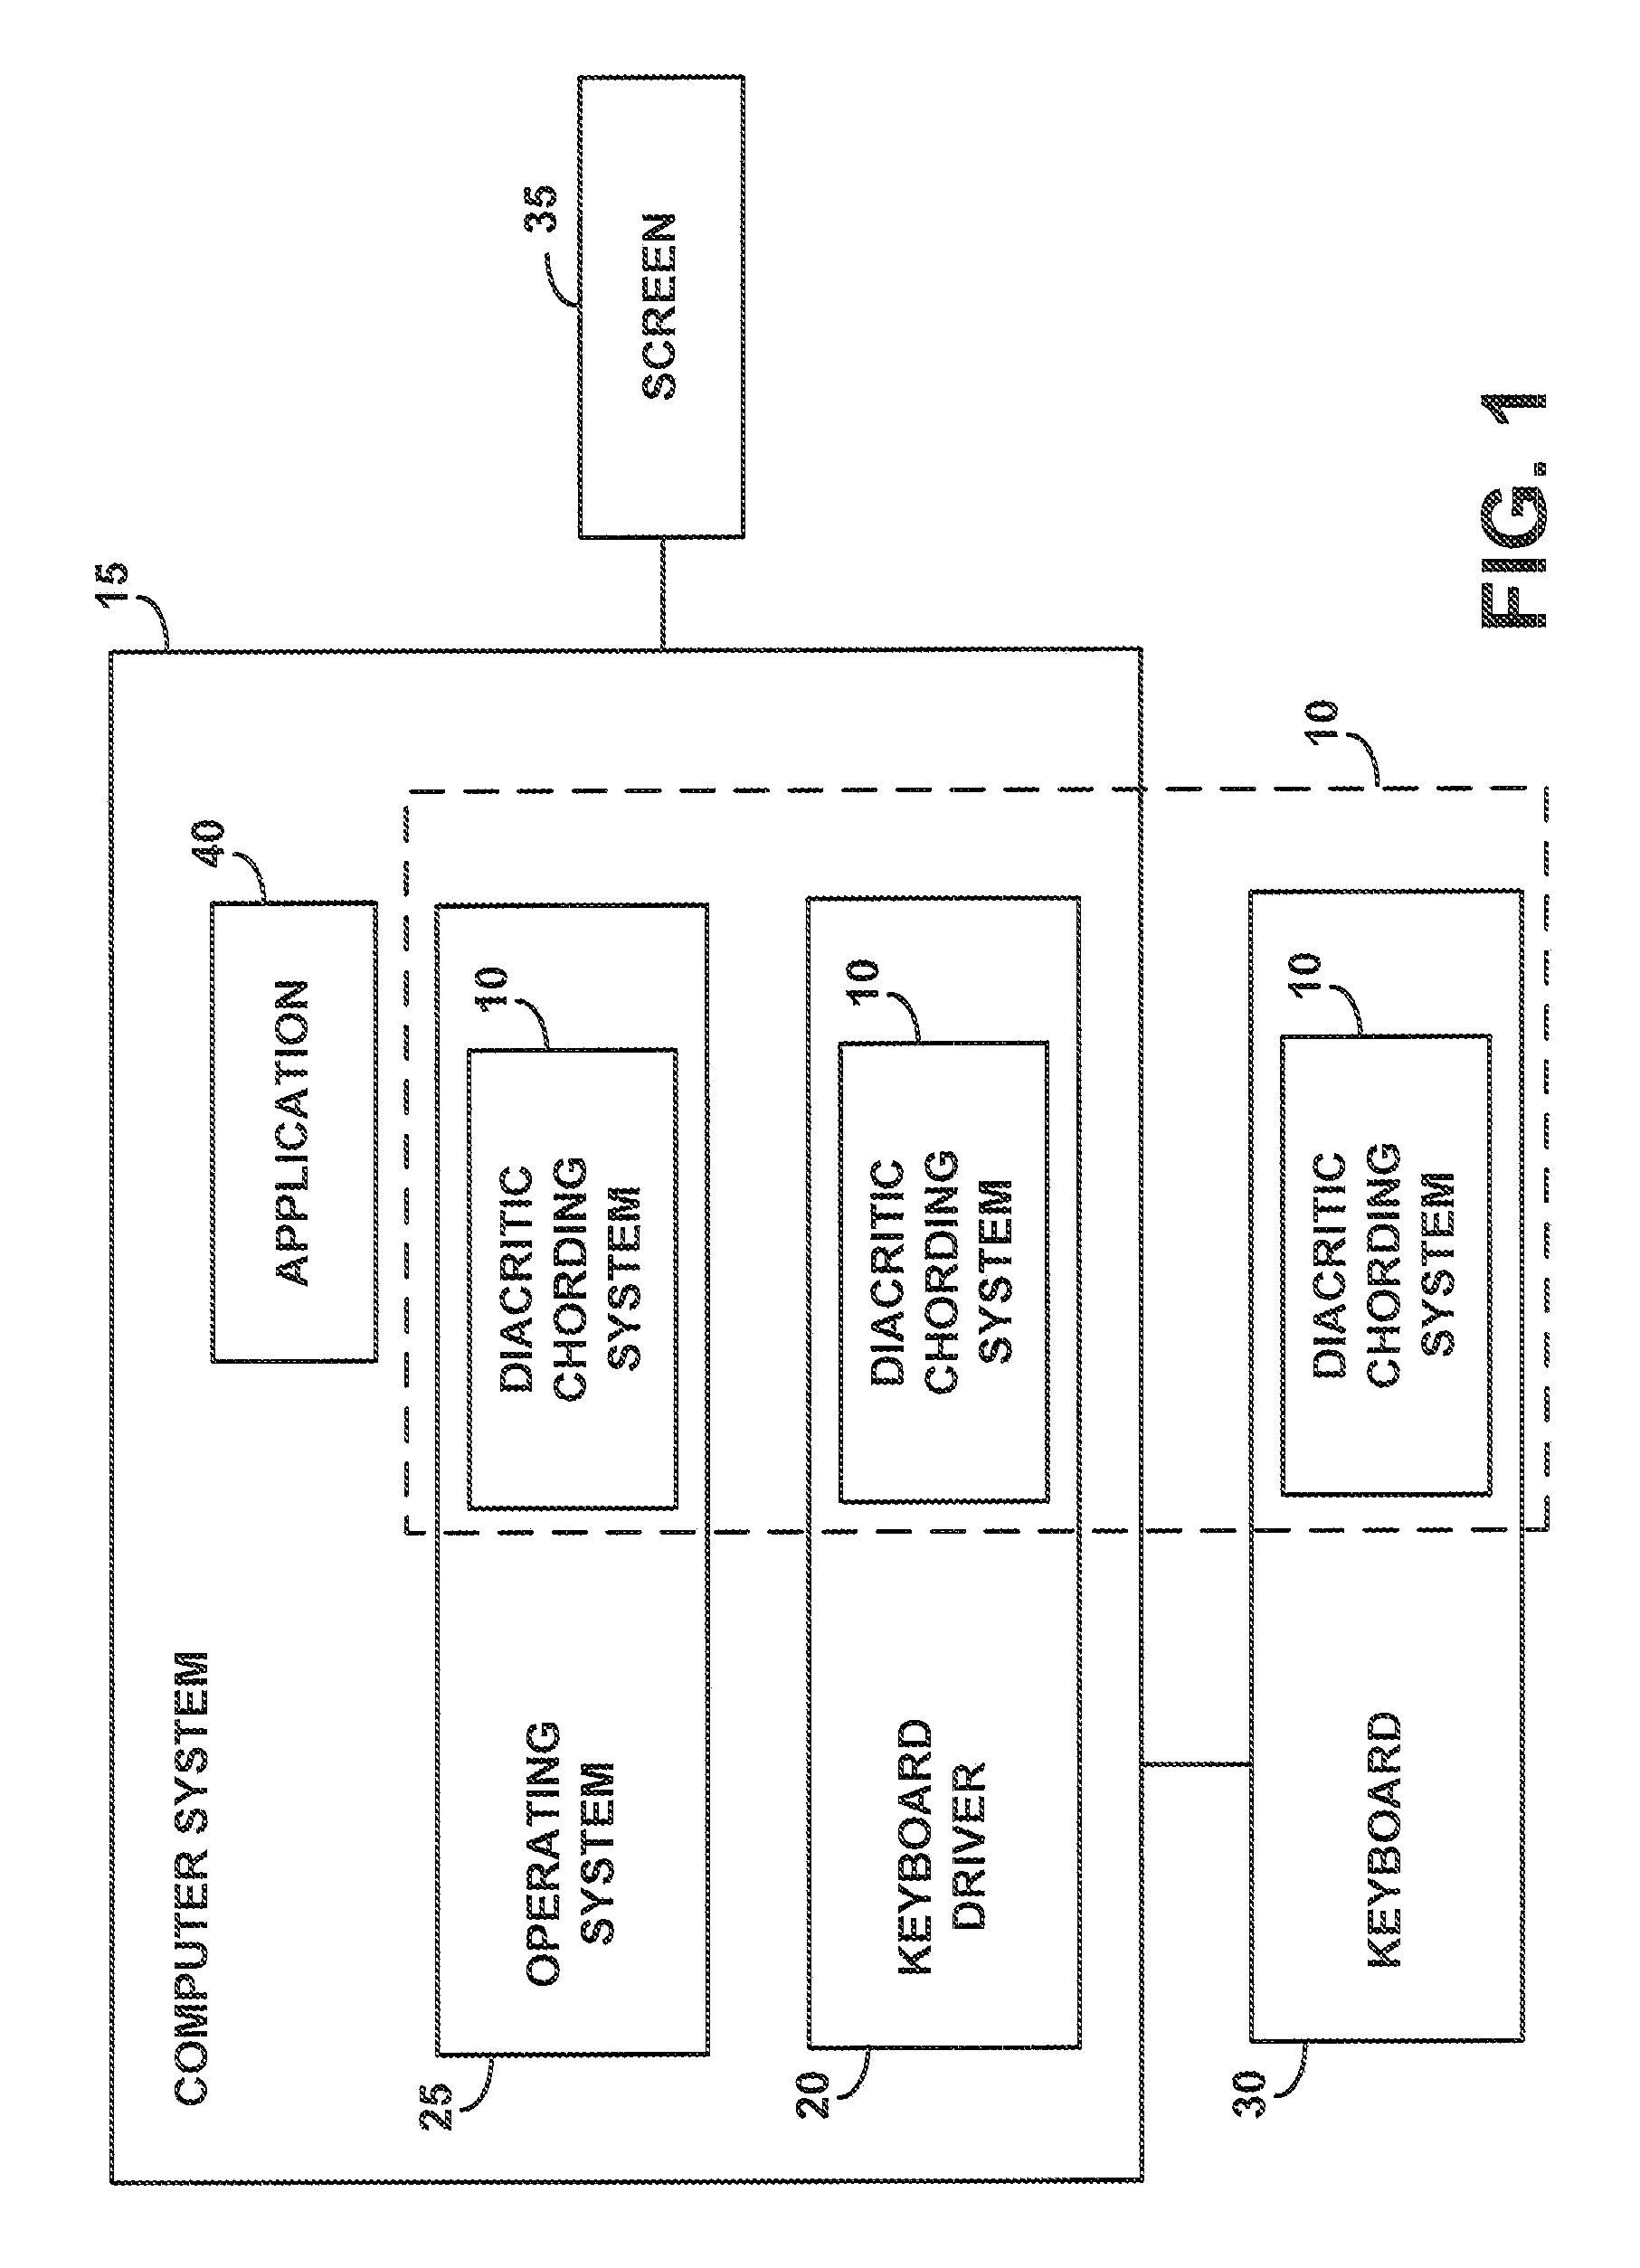 System and method for generating language specific diacritics for different languages using a single keyboard layout